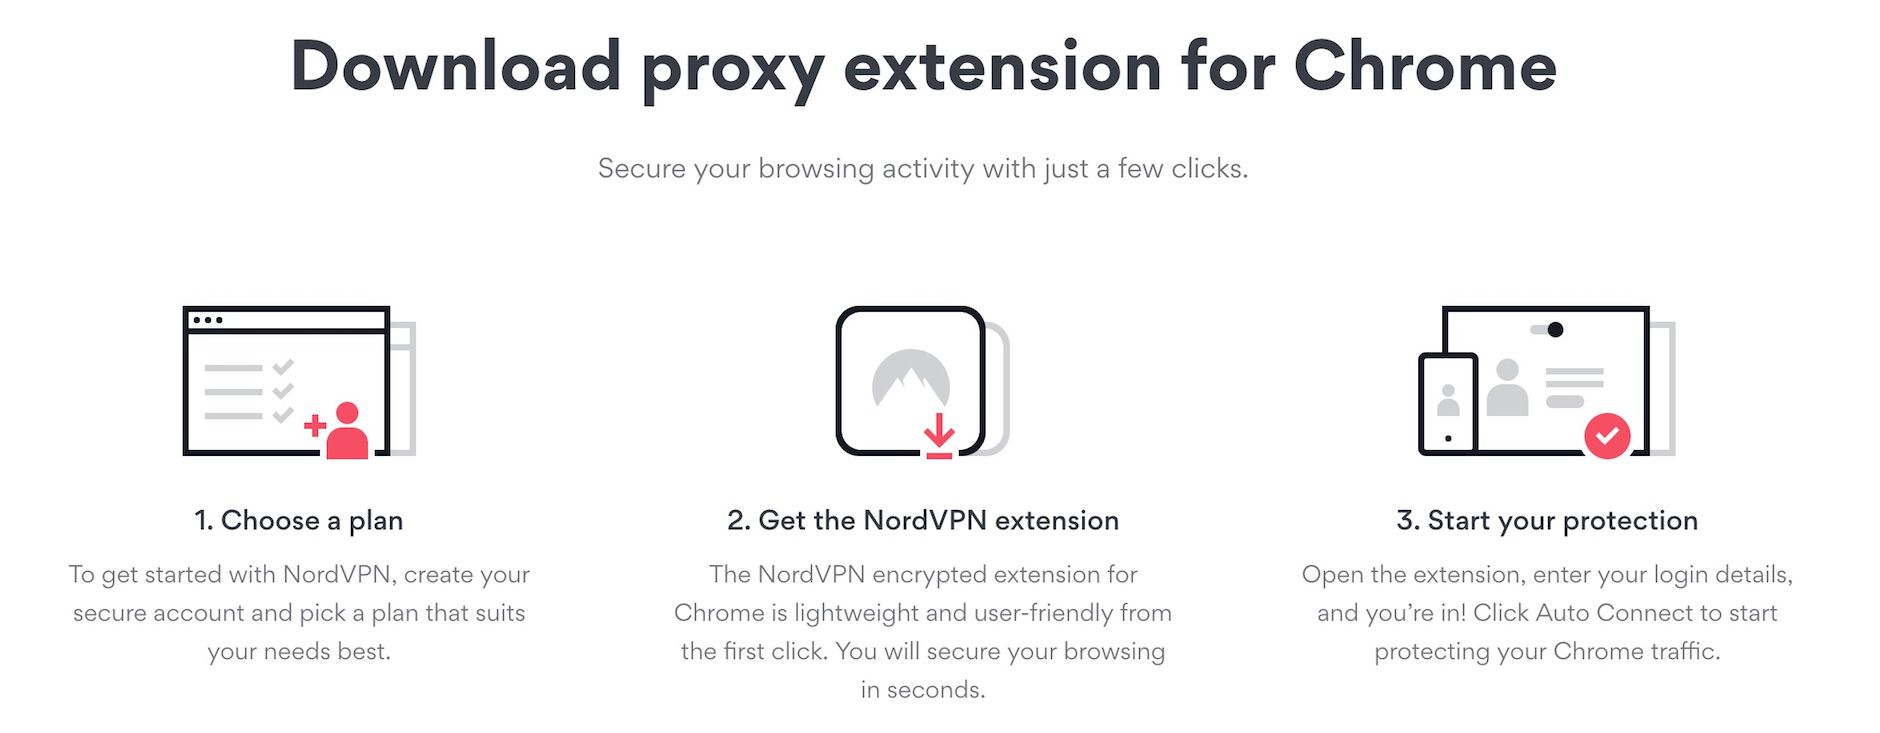 proxy extension for Chrome